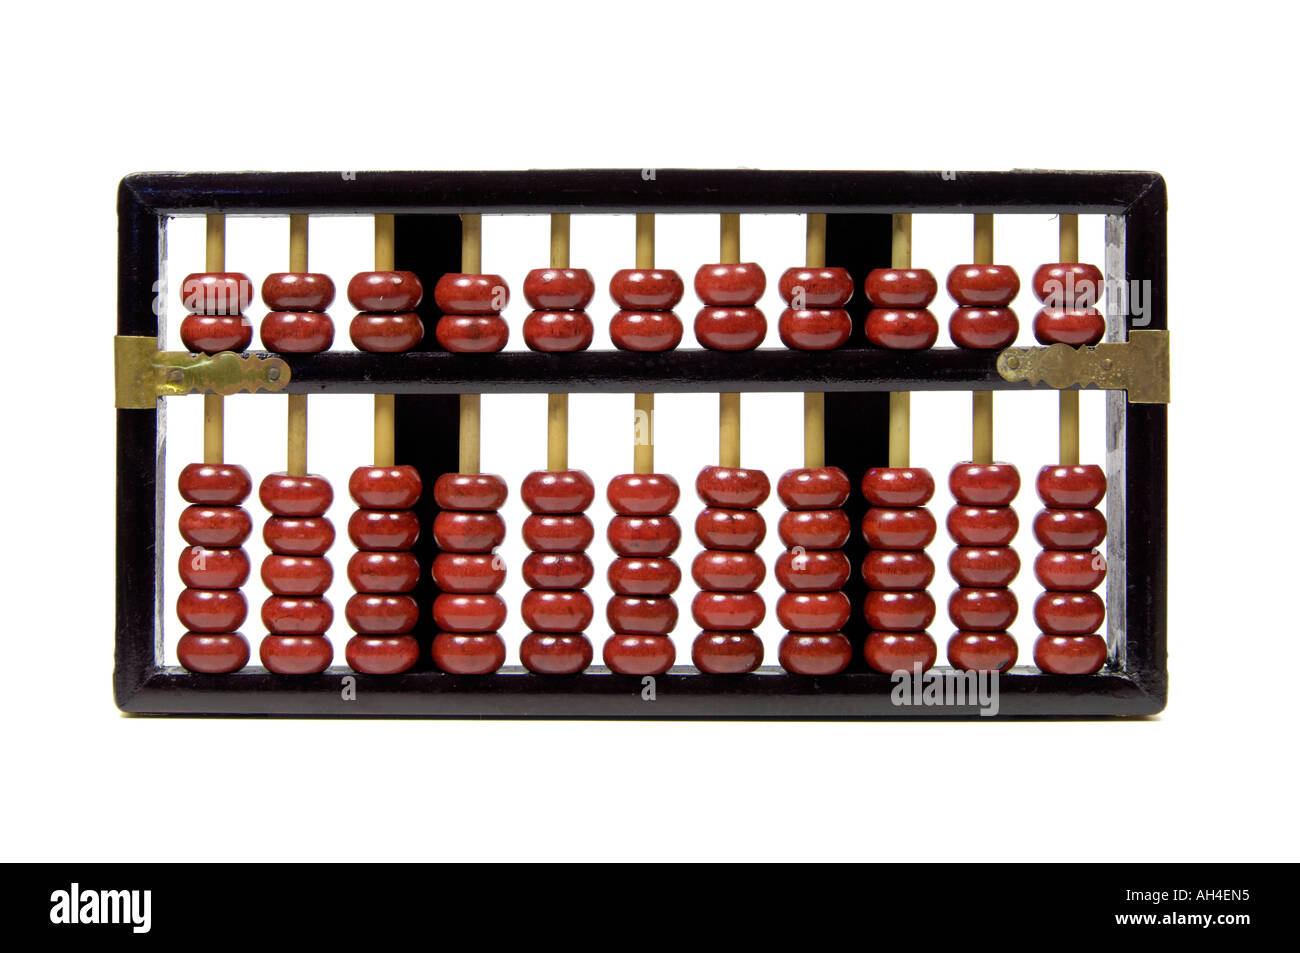 Chinese ancient calculating machine Abacus Stock Photo